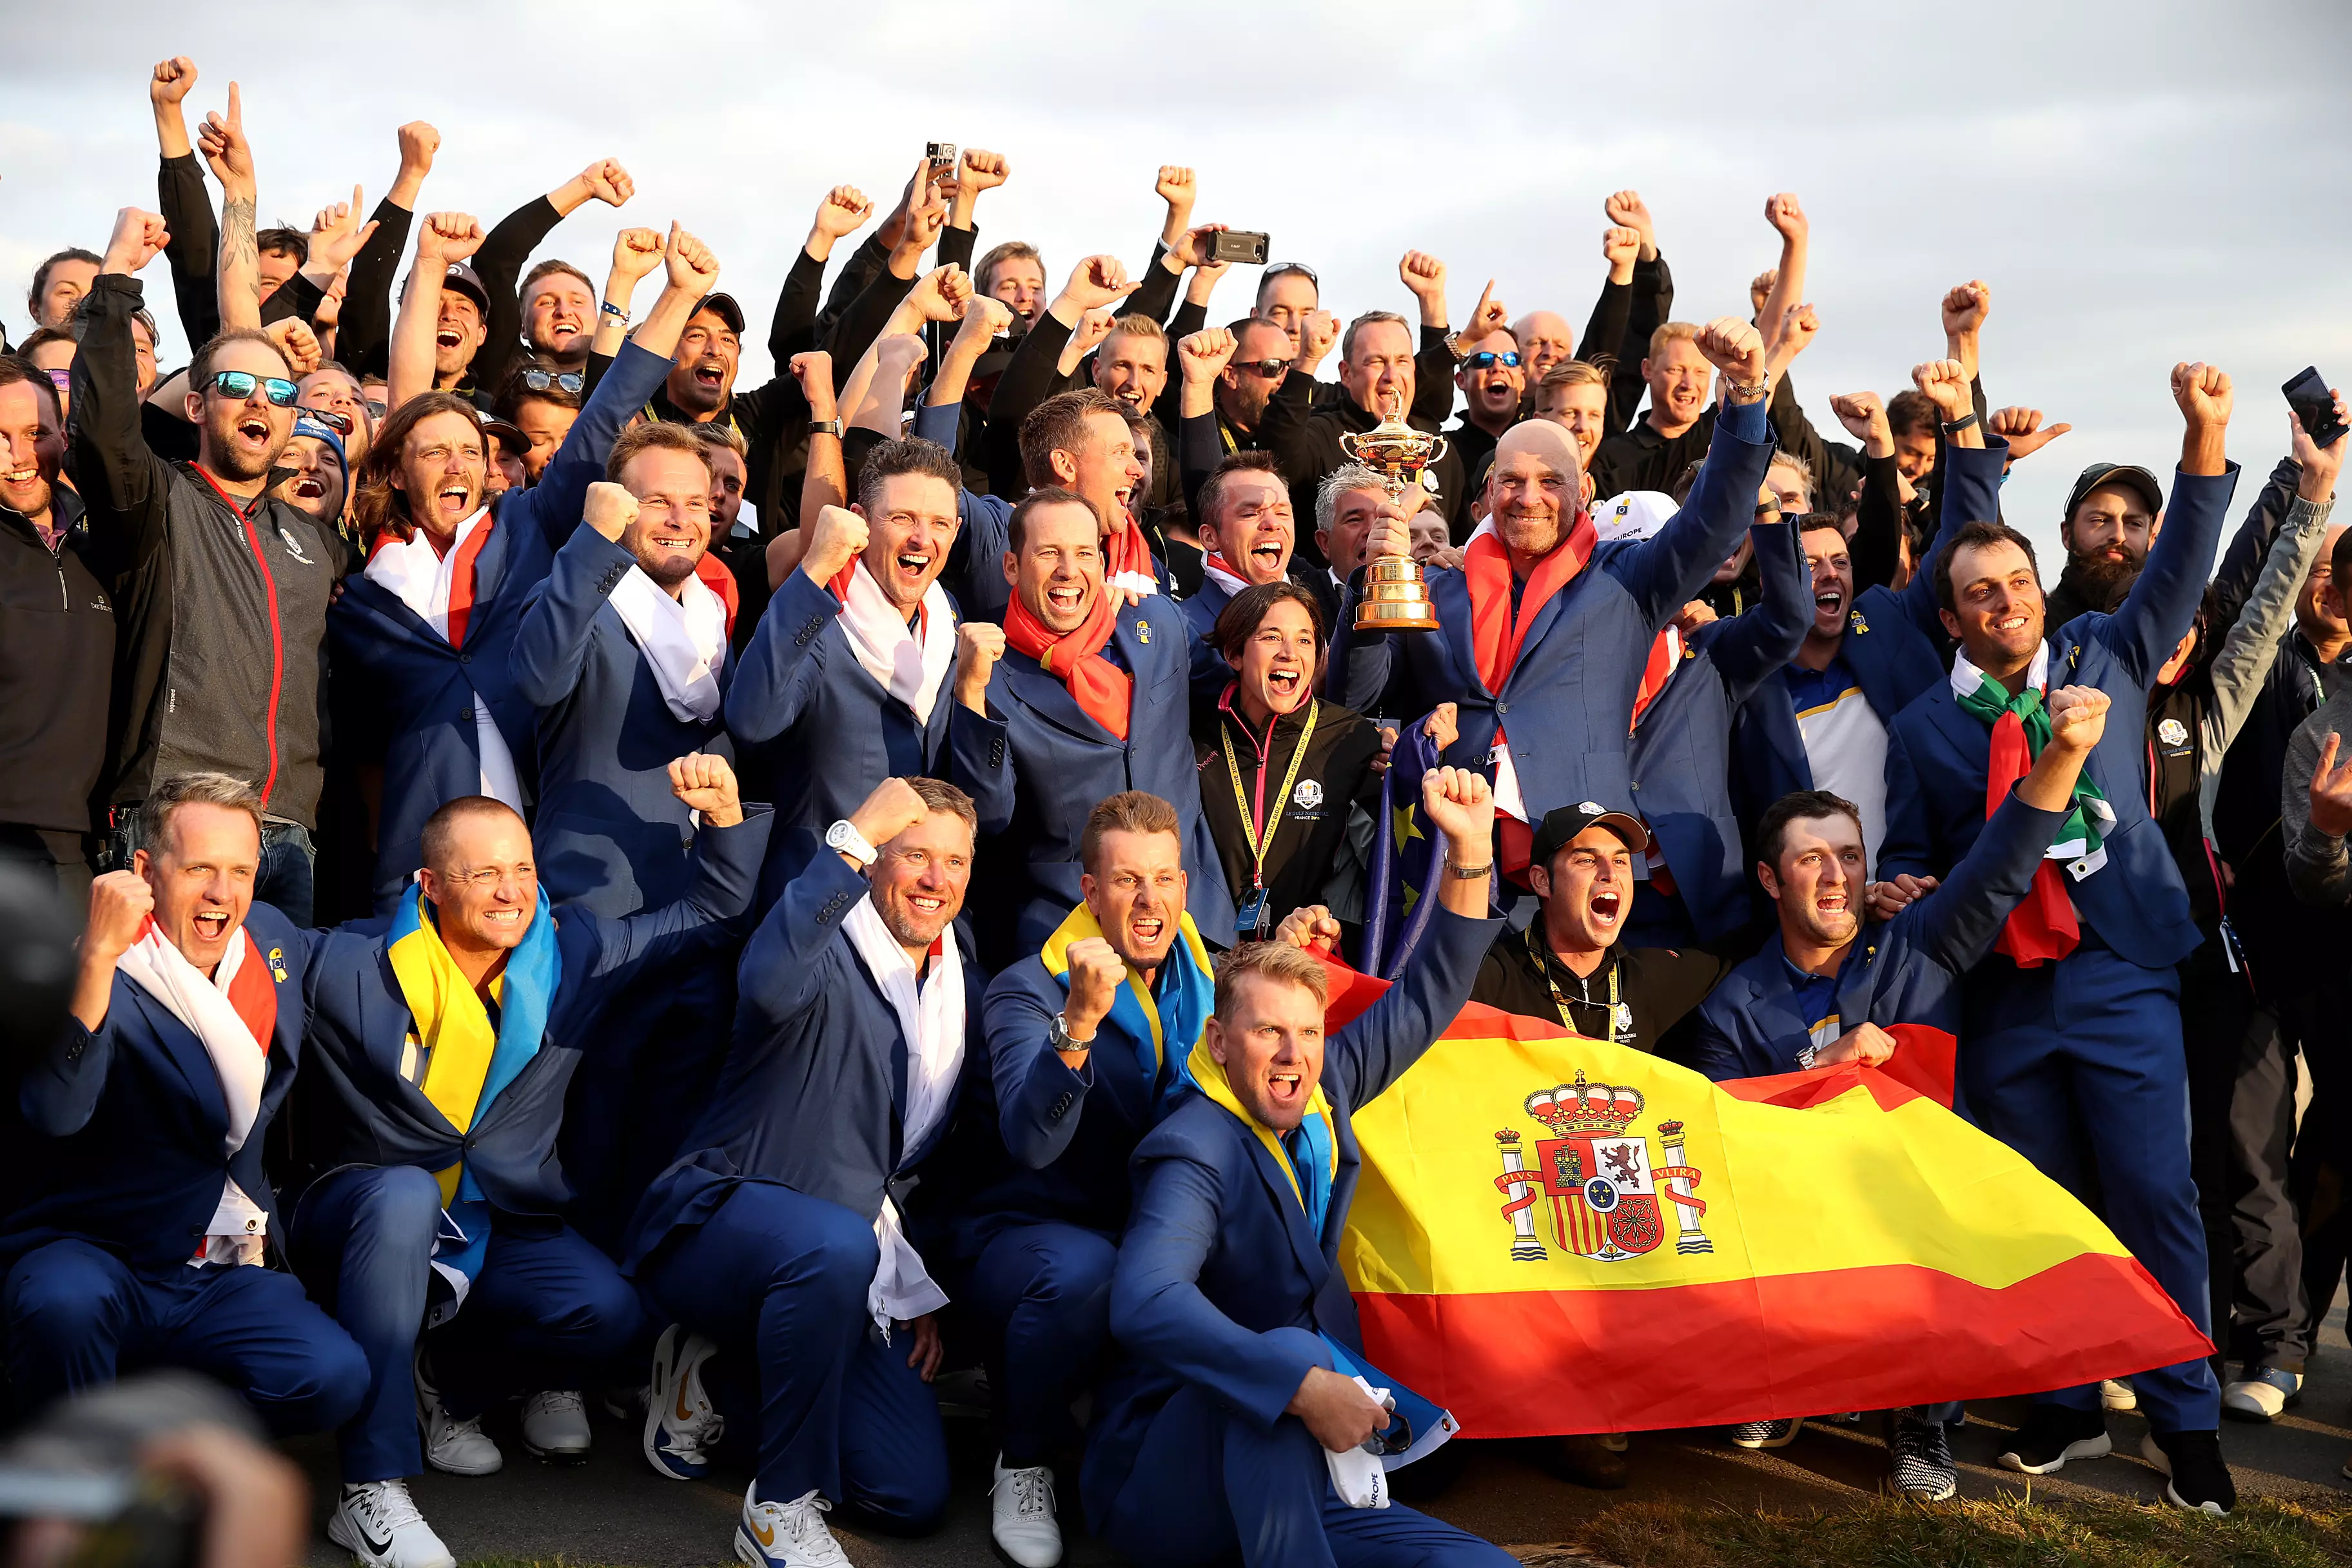 Ryder Cup victory came easy for Europe. Image: PA Images